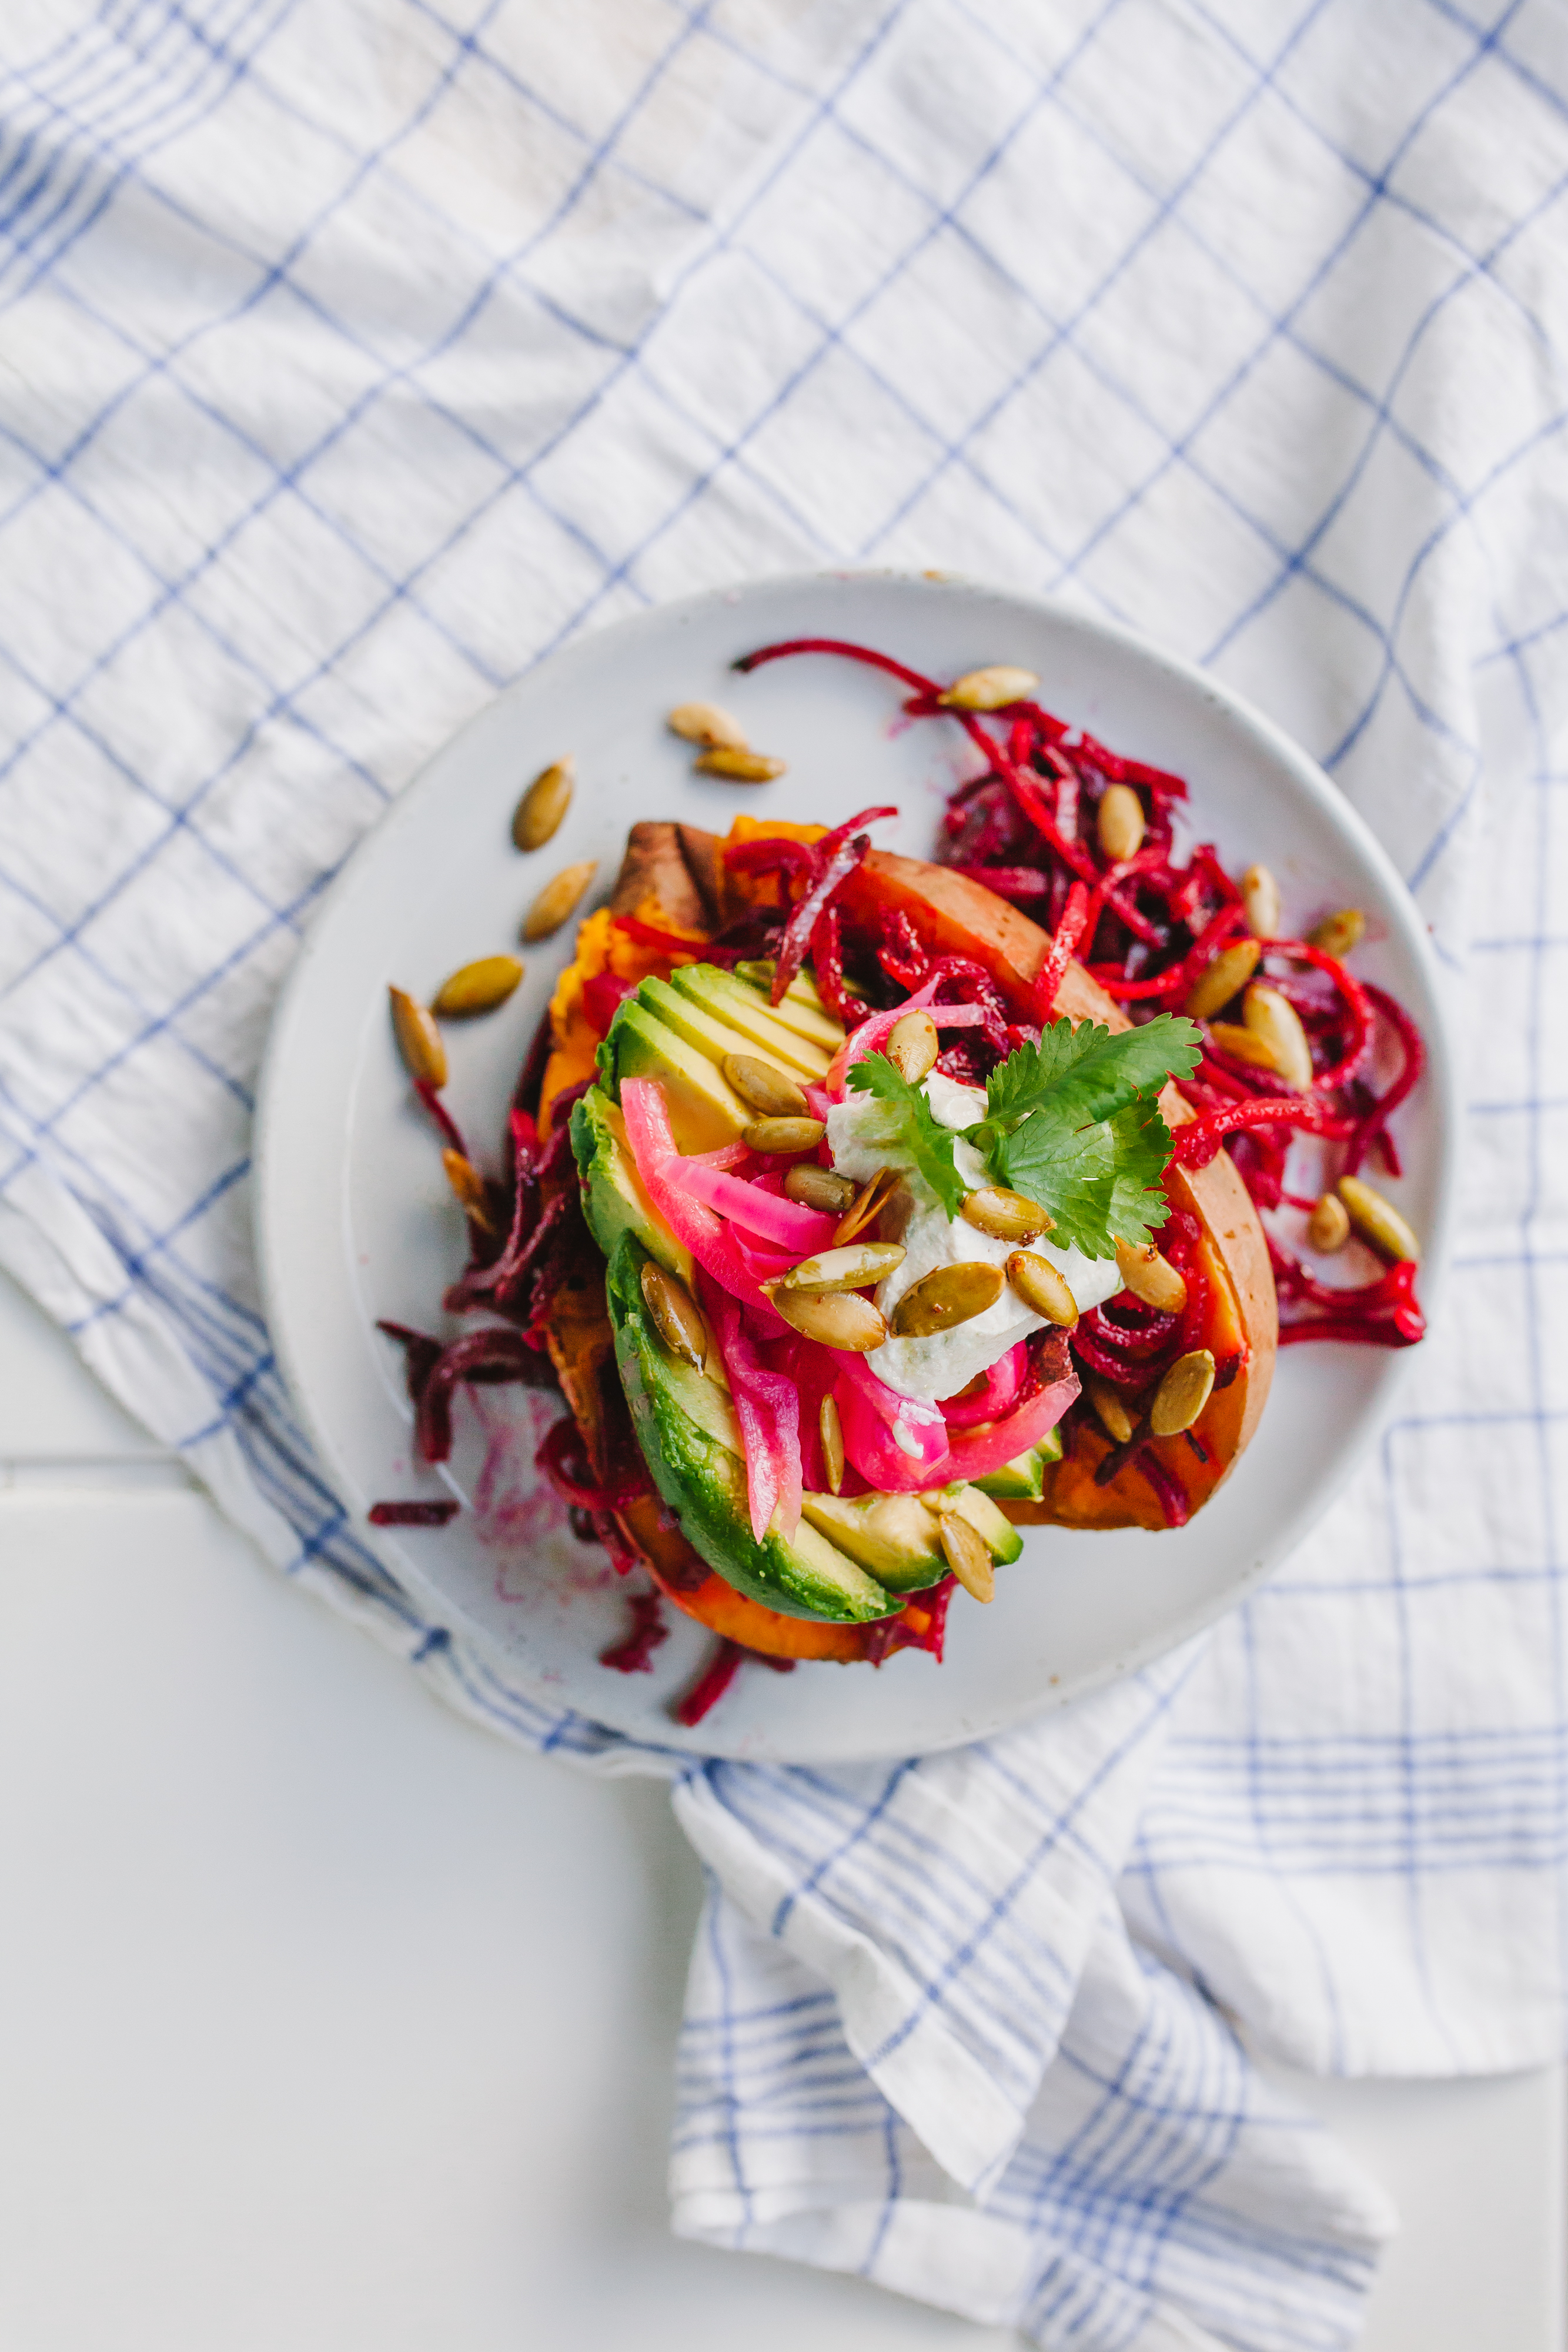 Stuffed Sweet Potatoes with roasted pepitas, avo, beet spirals, and more - so much yum! | bygabriella.co